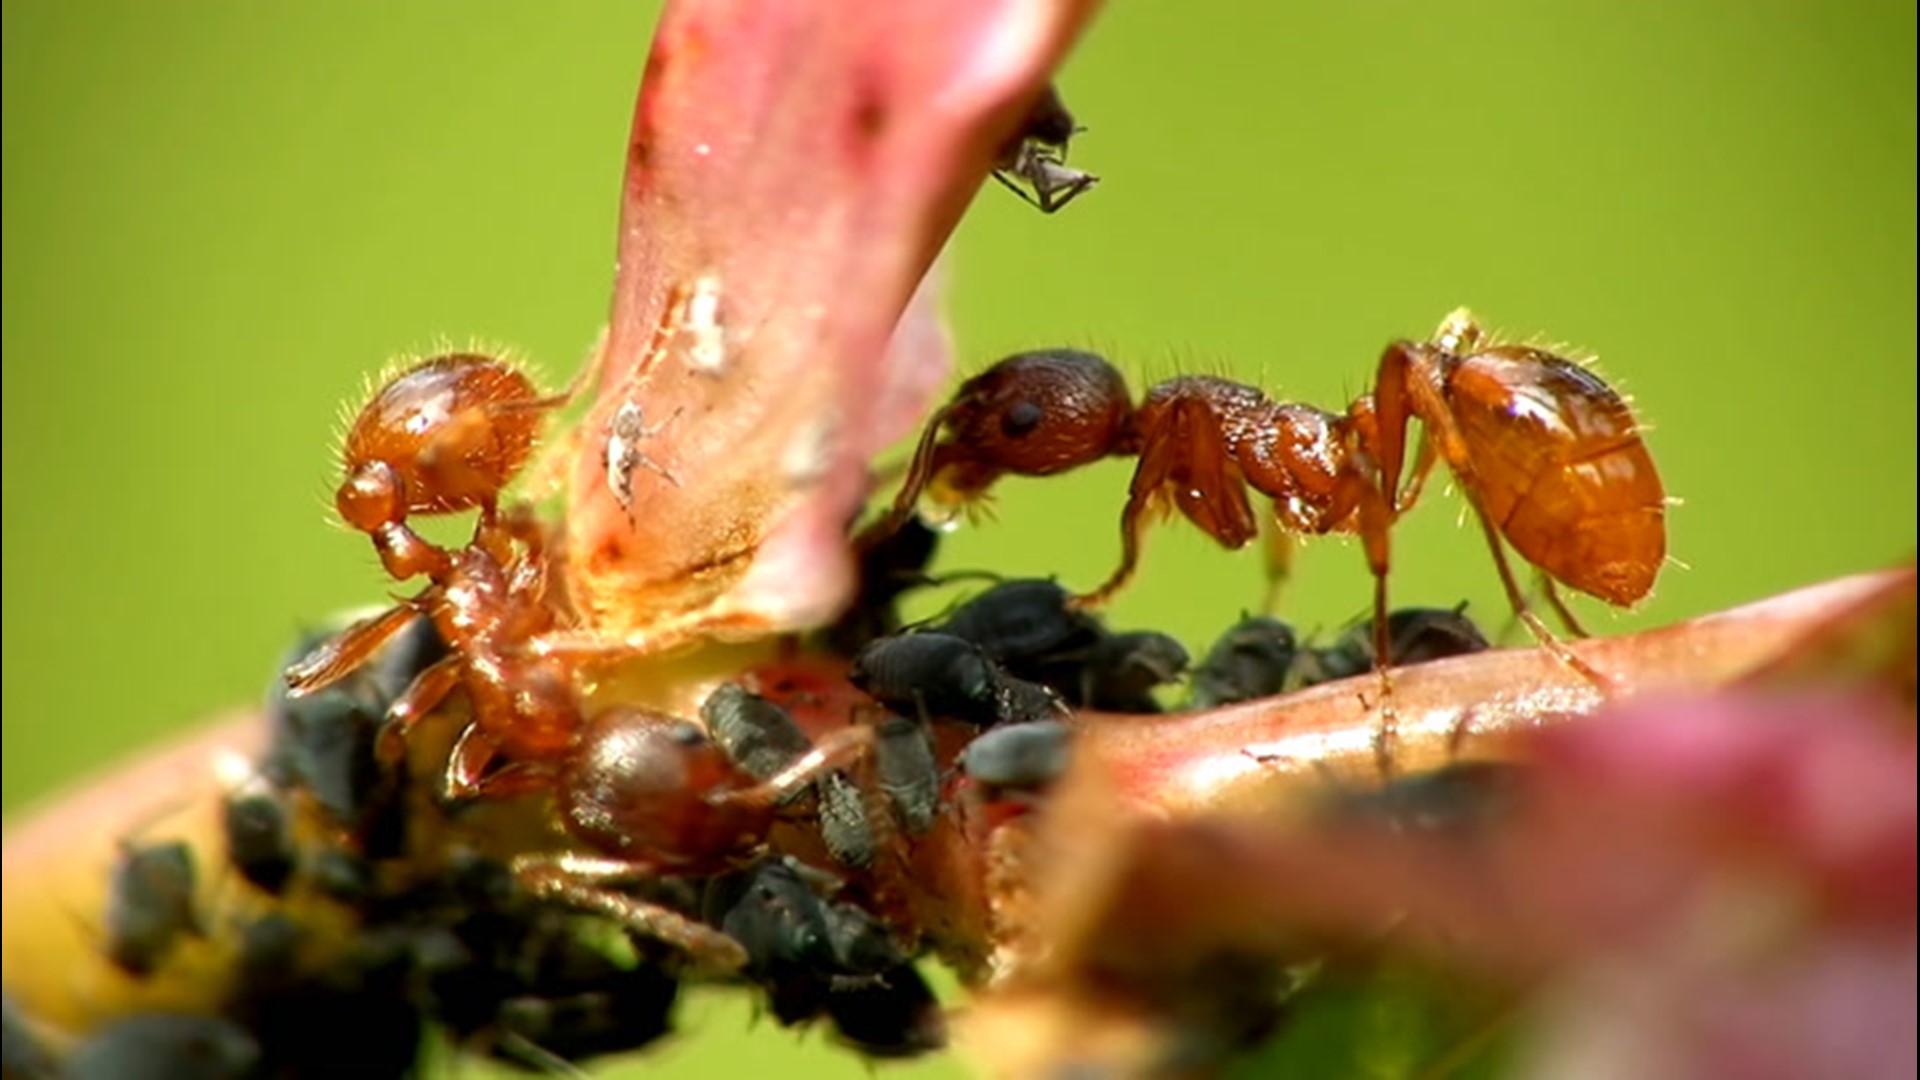 Experts believe fire ants are hitching a free ride on agricultural deliveries and they are expanding their presence into colder locations farther north.